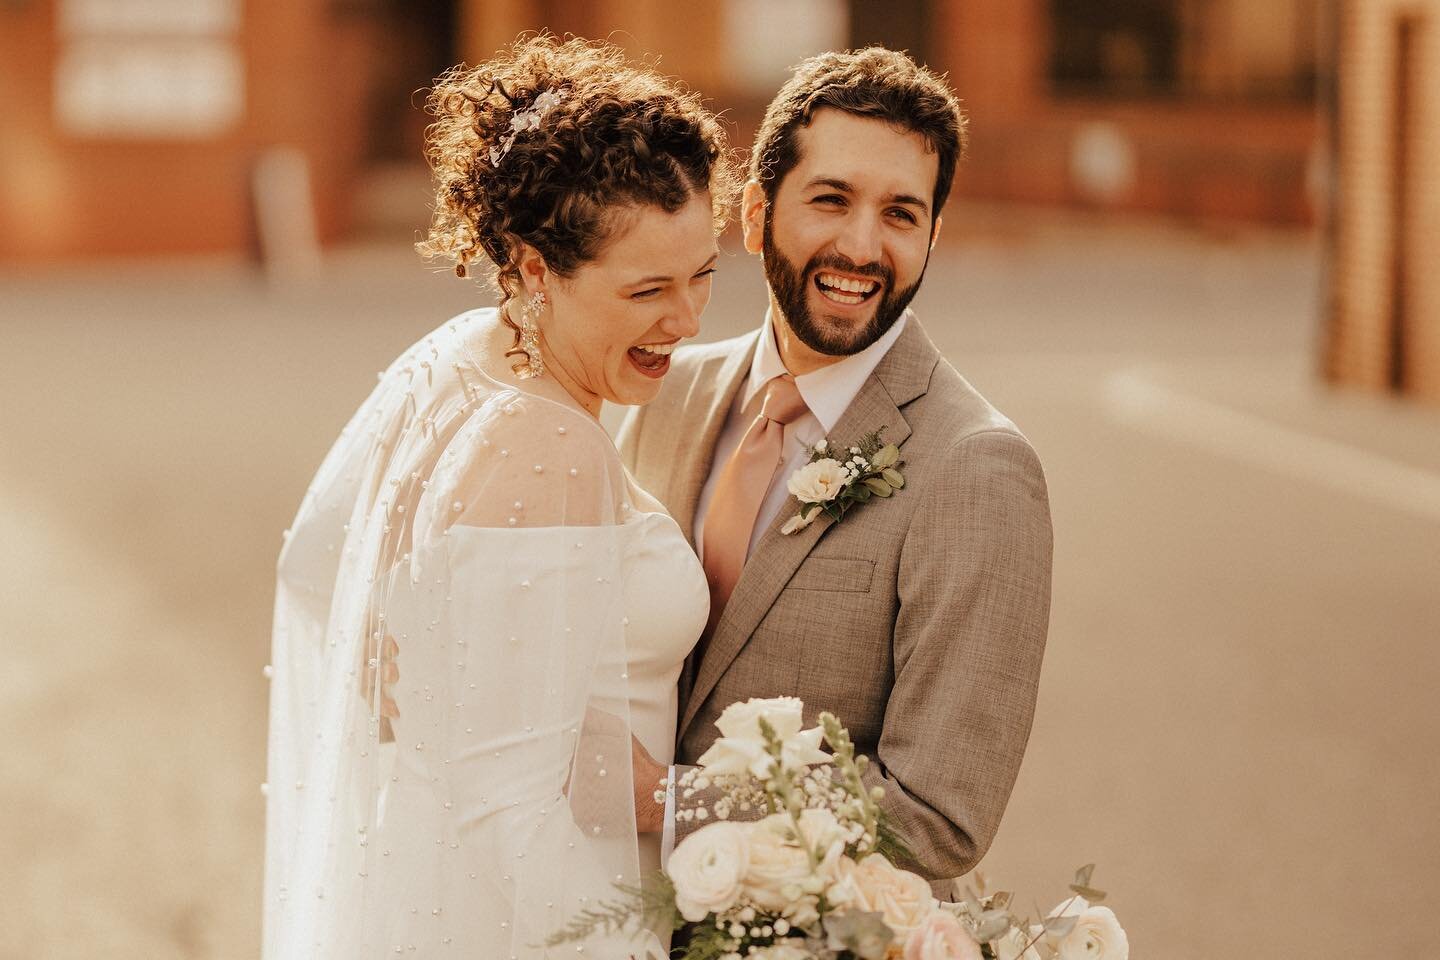 Maddie + David couldn&rsquo;t look at one another without giggling or smiling ear to ear. The joy and love that surrounded them yesterday as they started their forever was electric! Although freezing outside, the warmth of their love + supportive fam